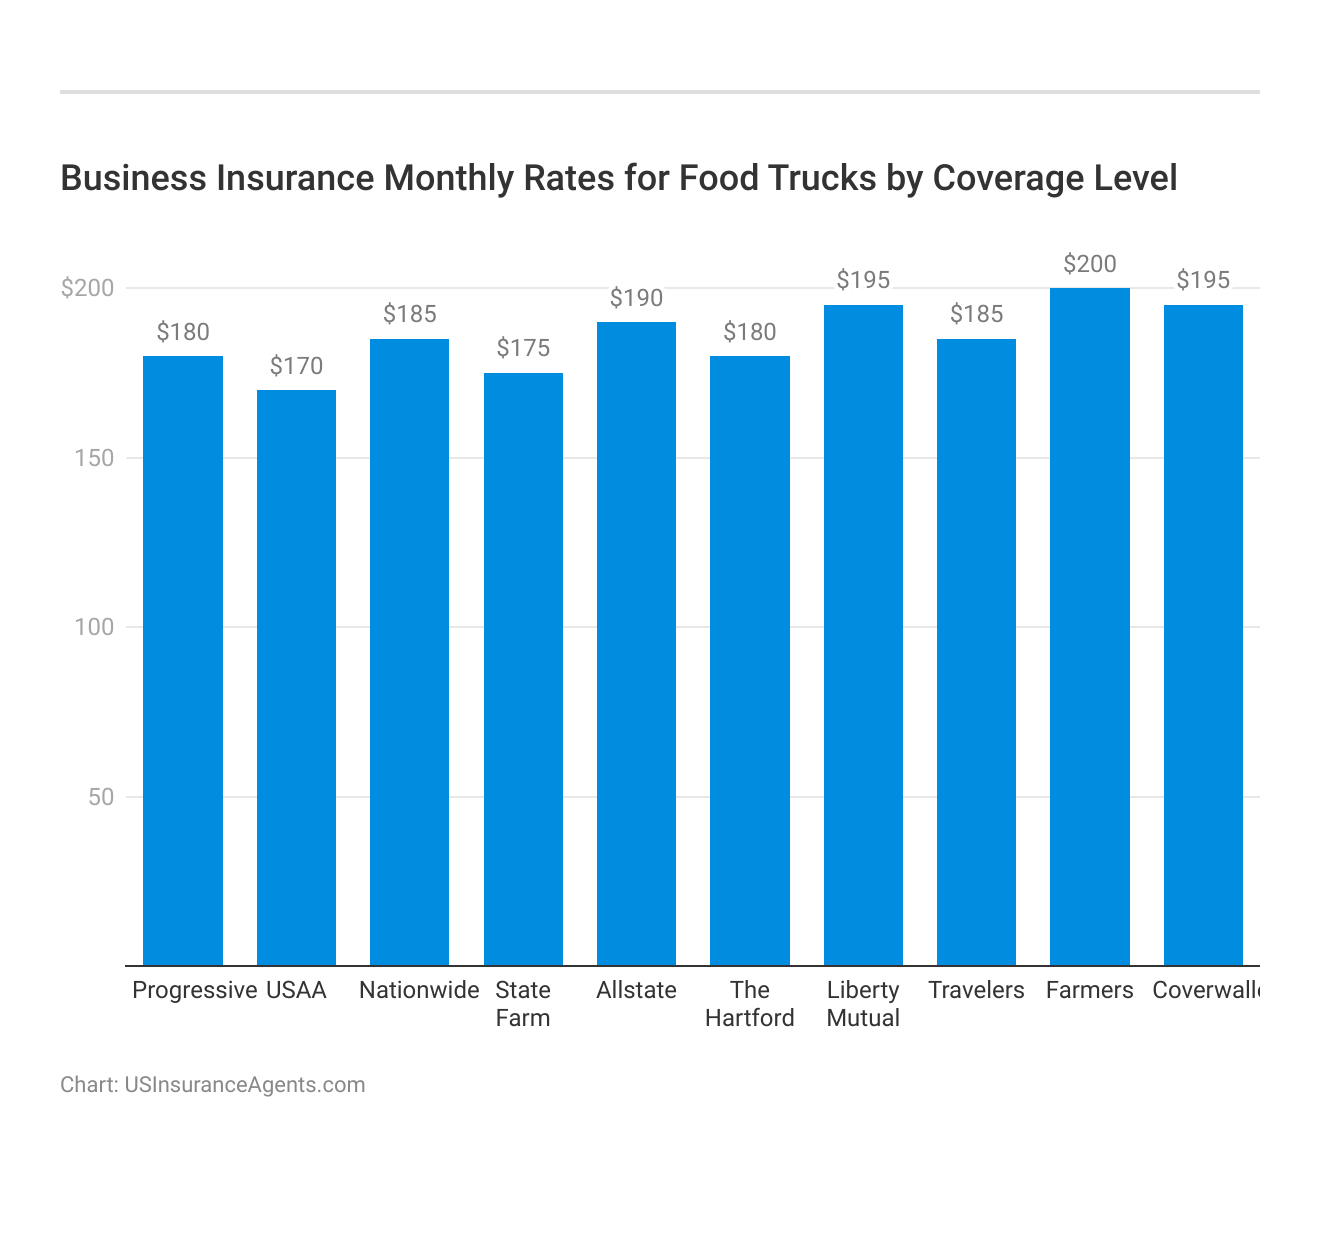 <h3>Business Insurance Monthly Rates for Food Trucks by Coverage Level</h3>